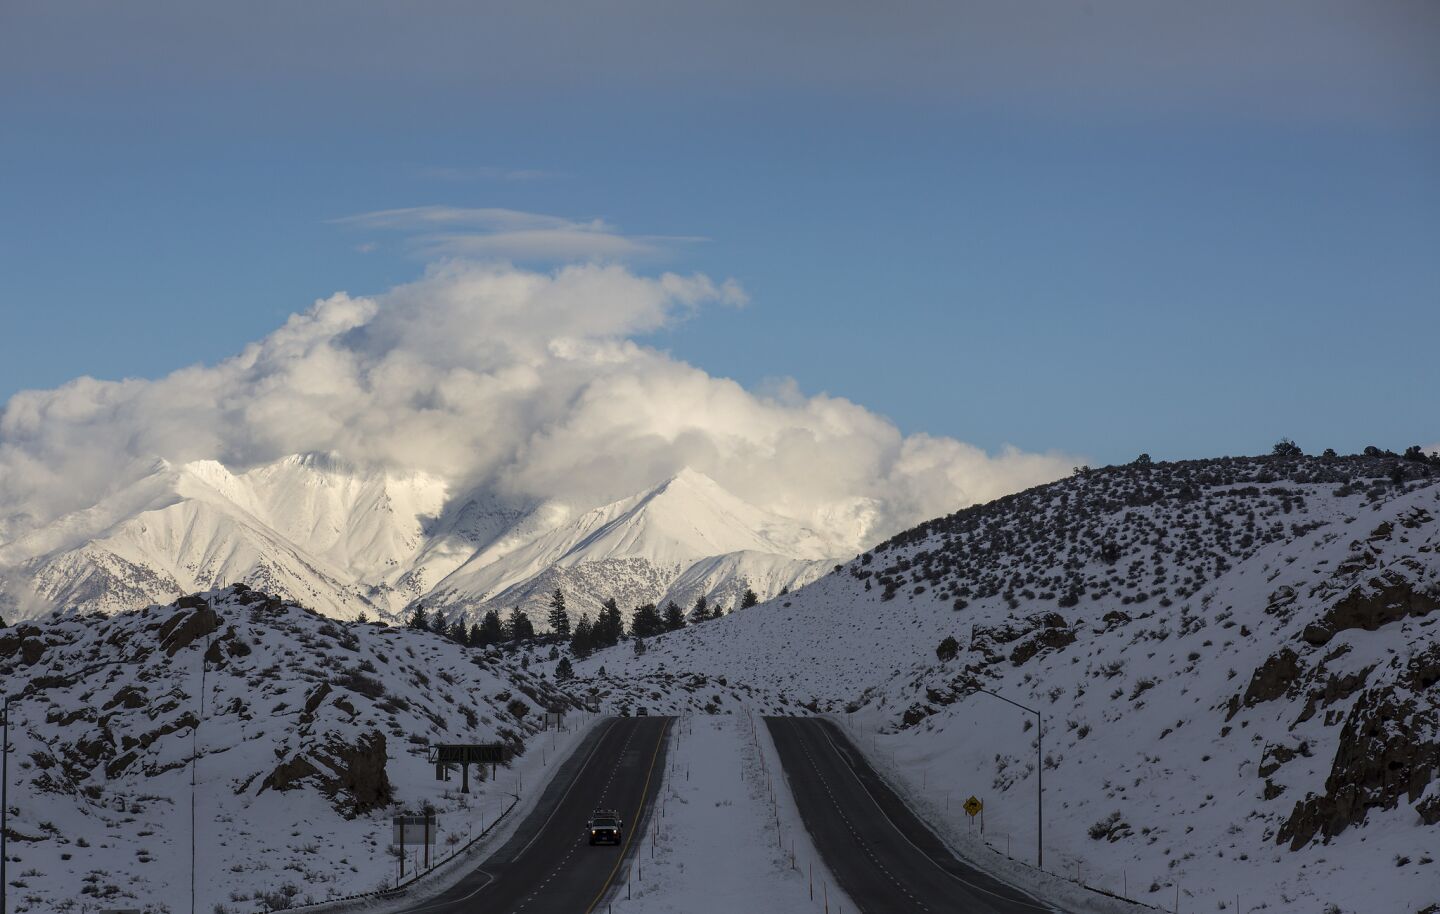 A break in a series of storms moving across California highlights the snow-covered White Mountains looming over U.S. Highway 395 in Crowley Lake.